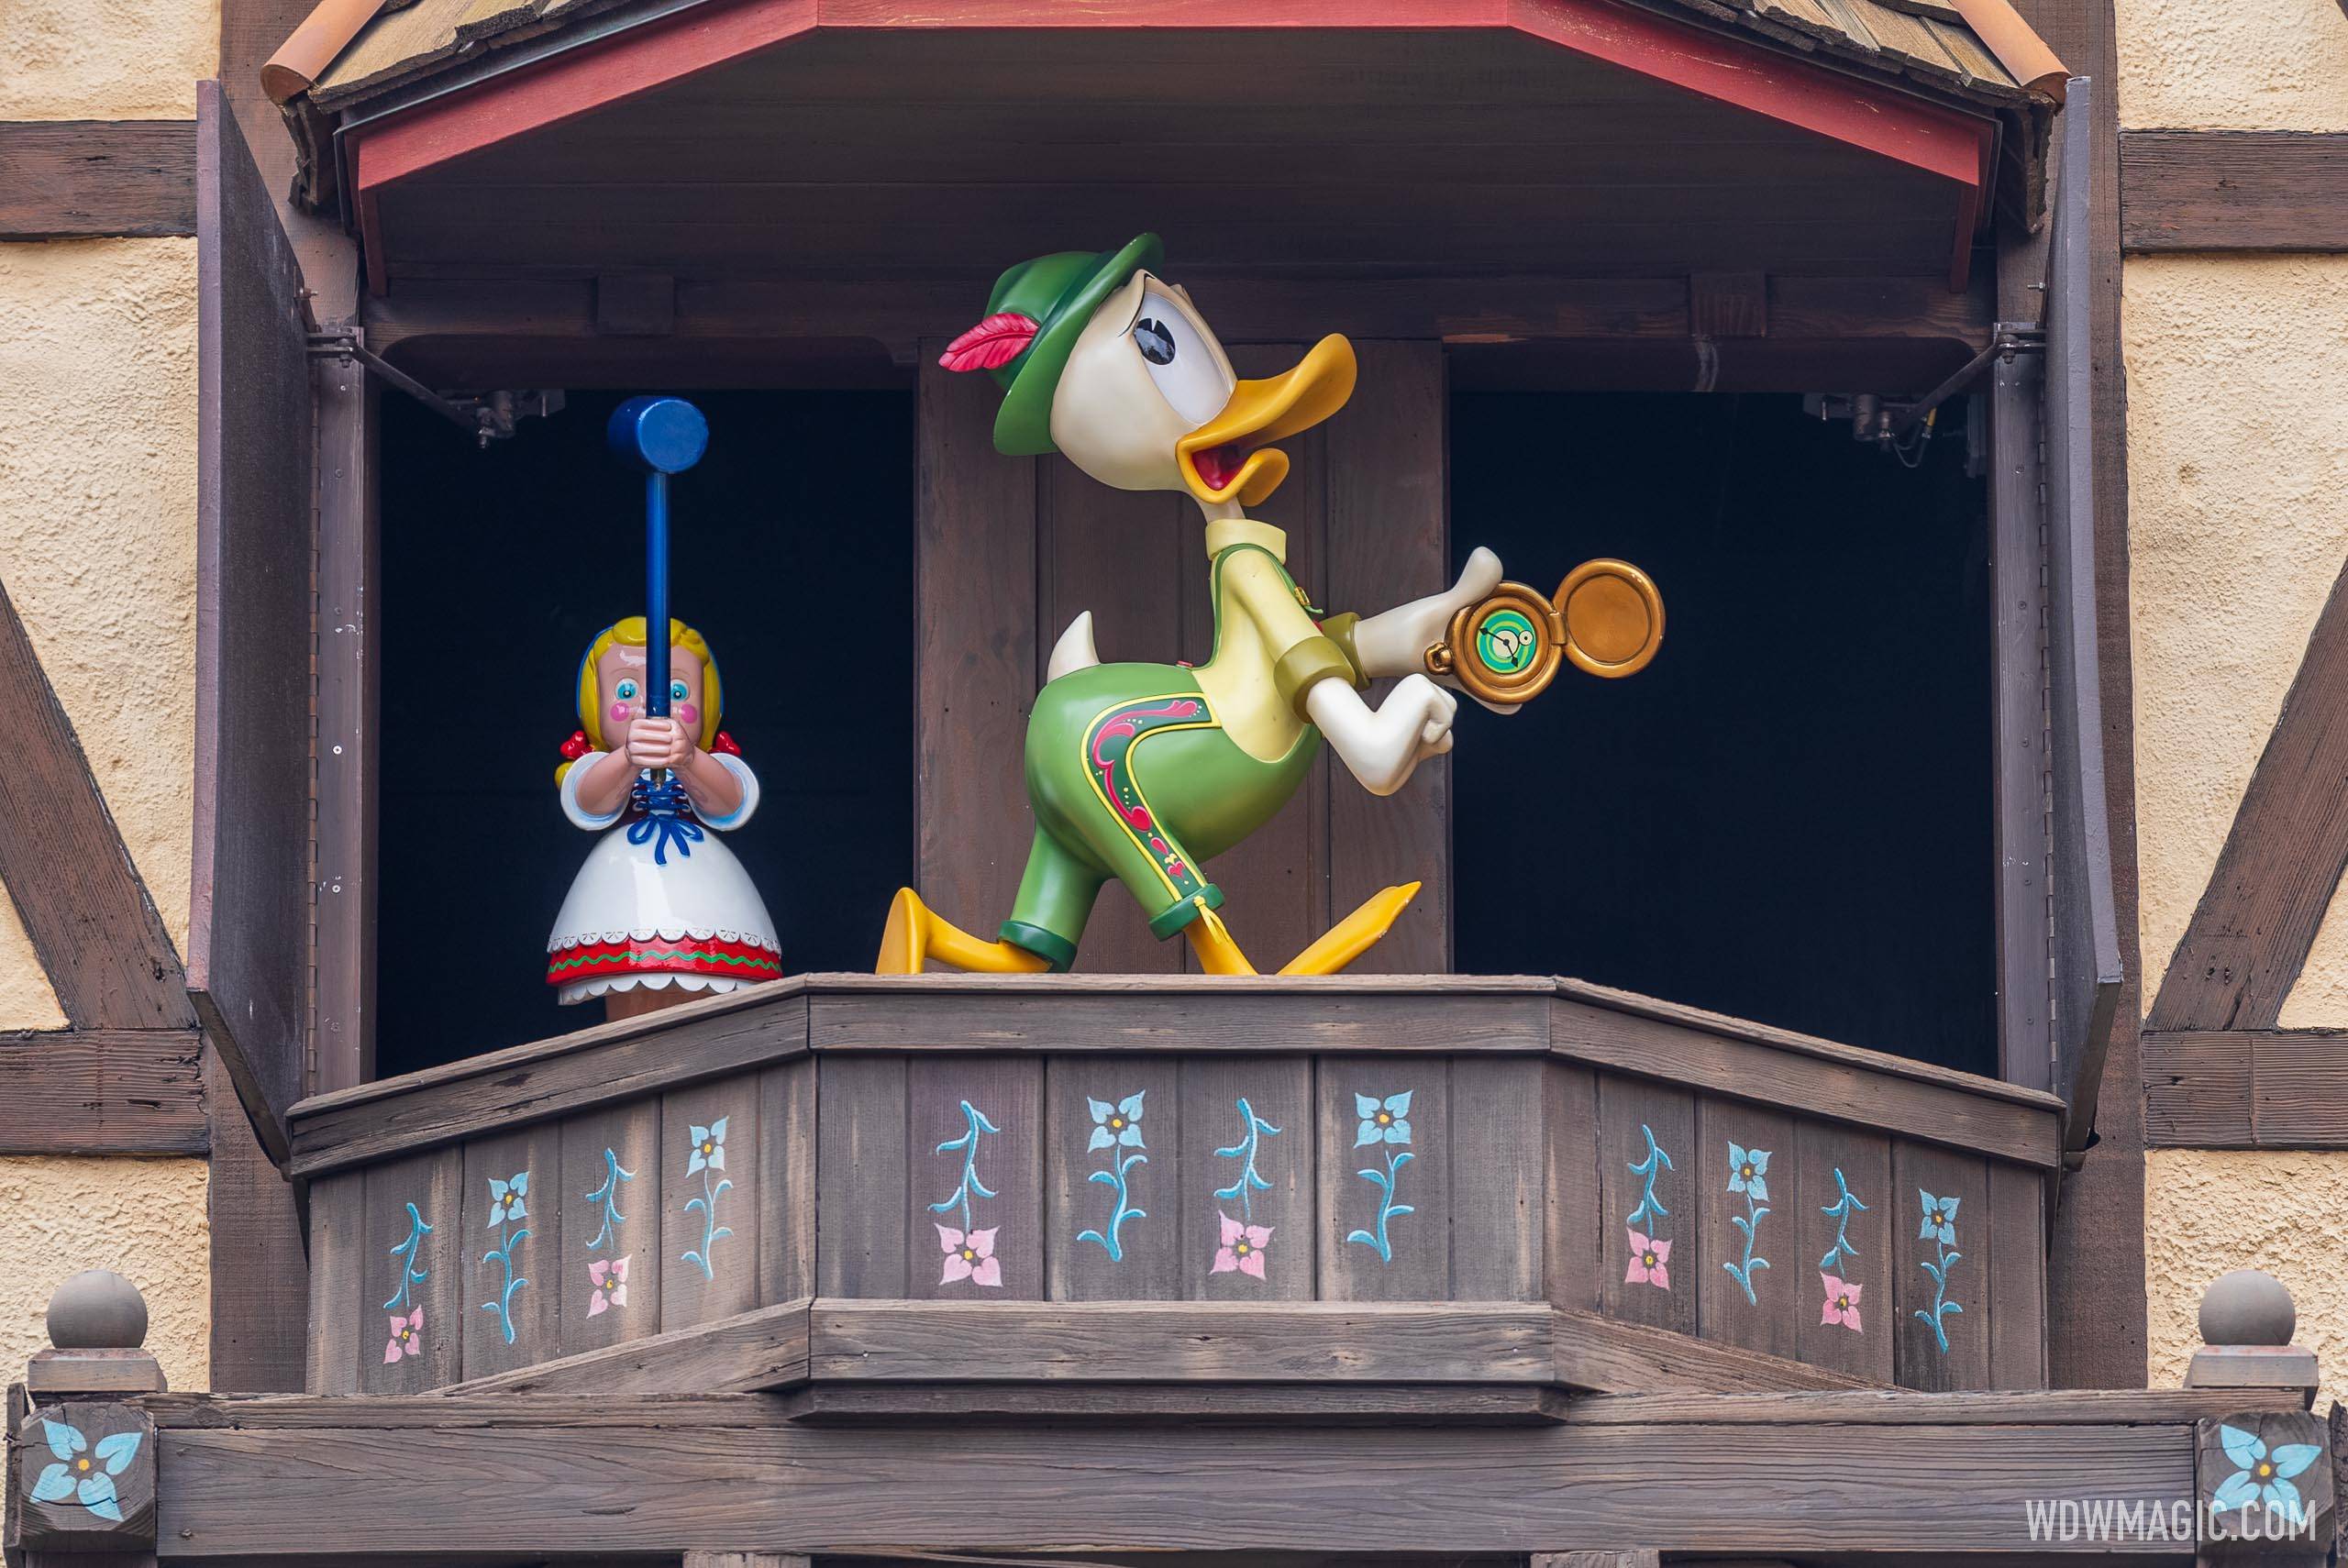 DuckTales characters appear at the Germany pavilion during DuckTales World Showcase Adventure